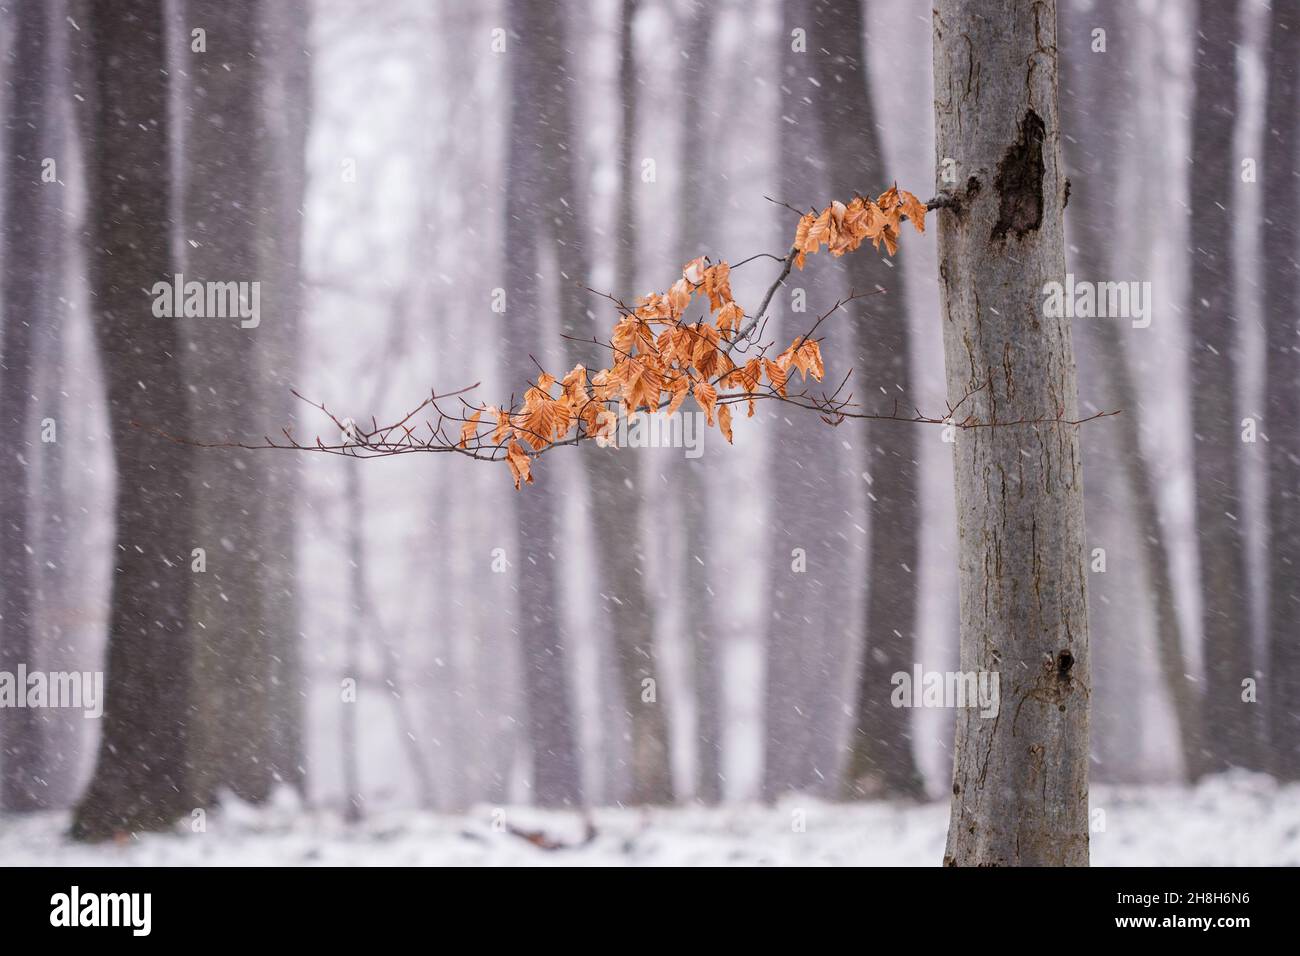 Snowing in forest. Winter is coming. Branch of beech tree with autumn leaves in wind. Cold weather in change of season Stock Photo